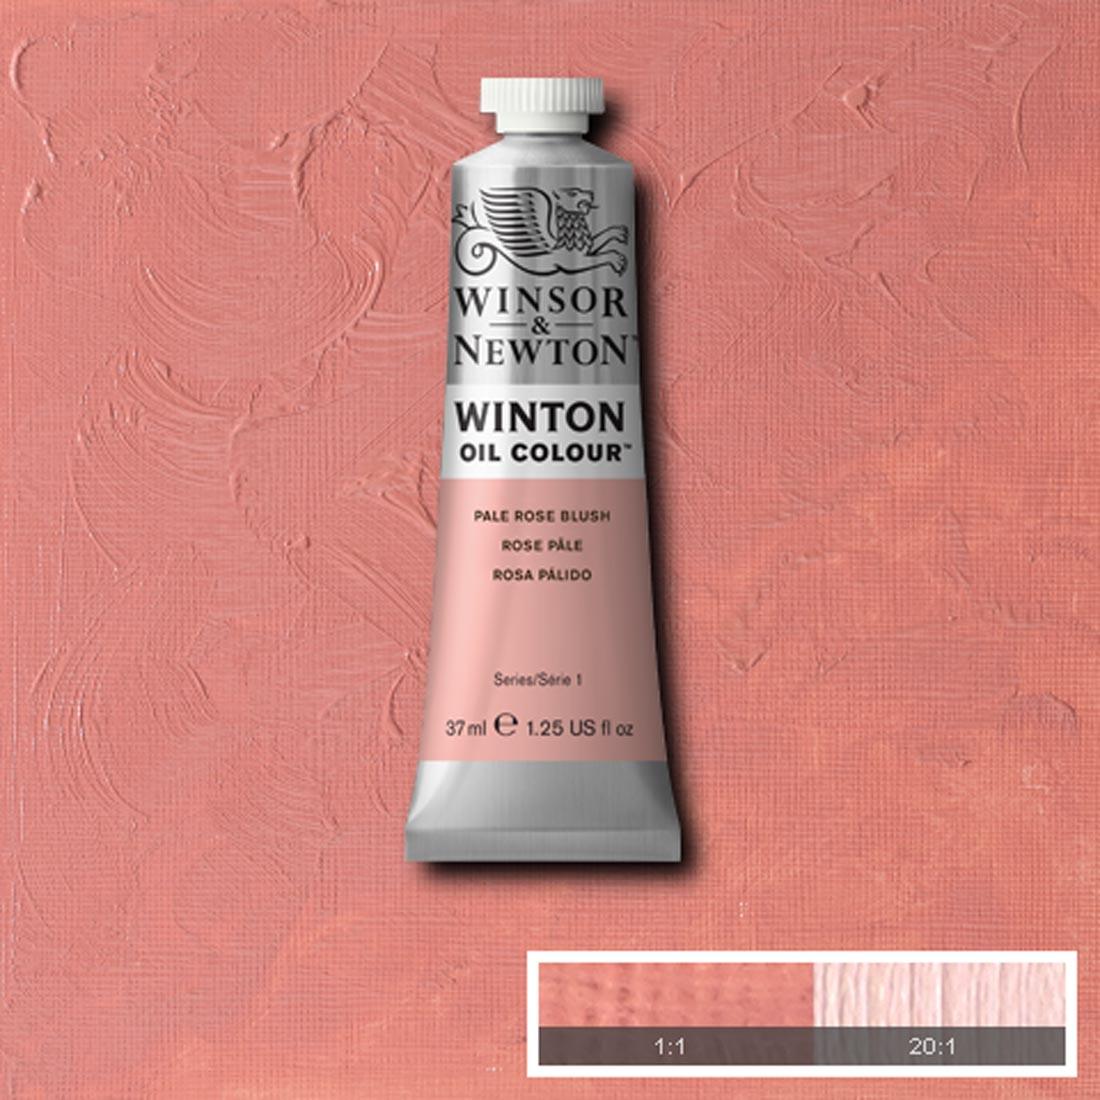 Tube of Pale Rose Blush Winsor & Newton Winton Oil Colour with a paint swatch for the background